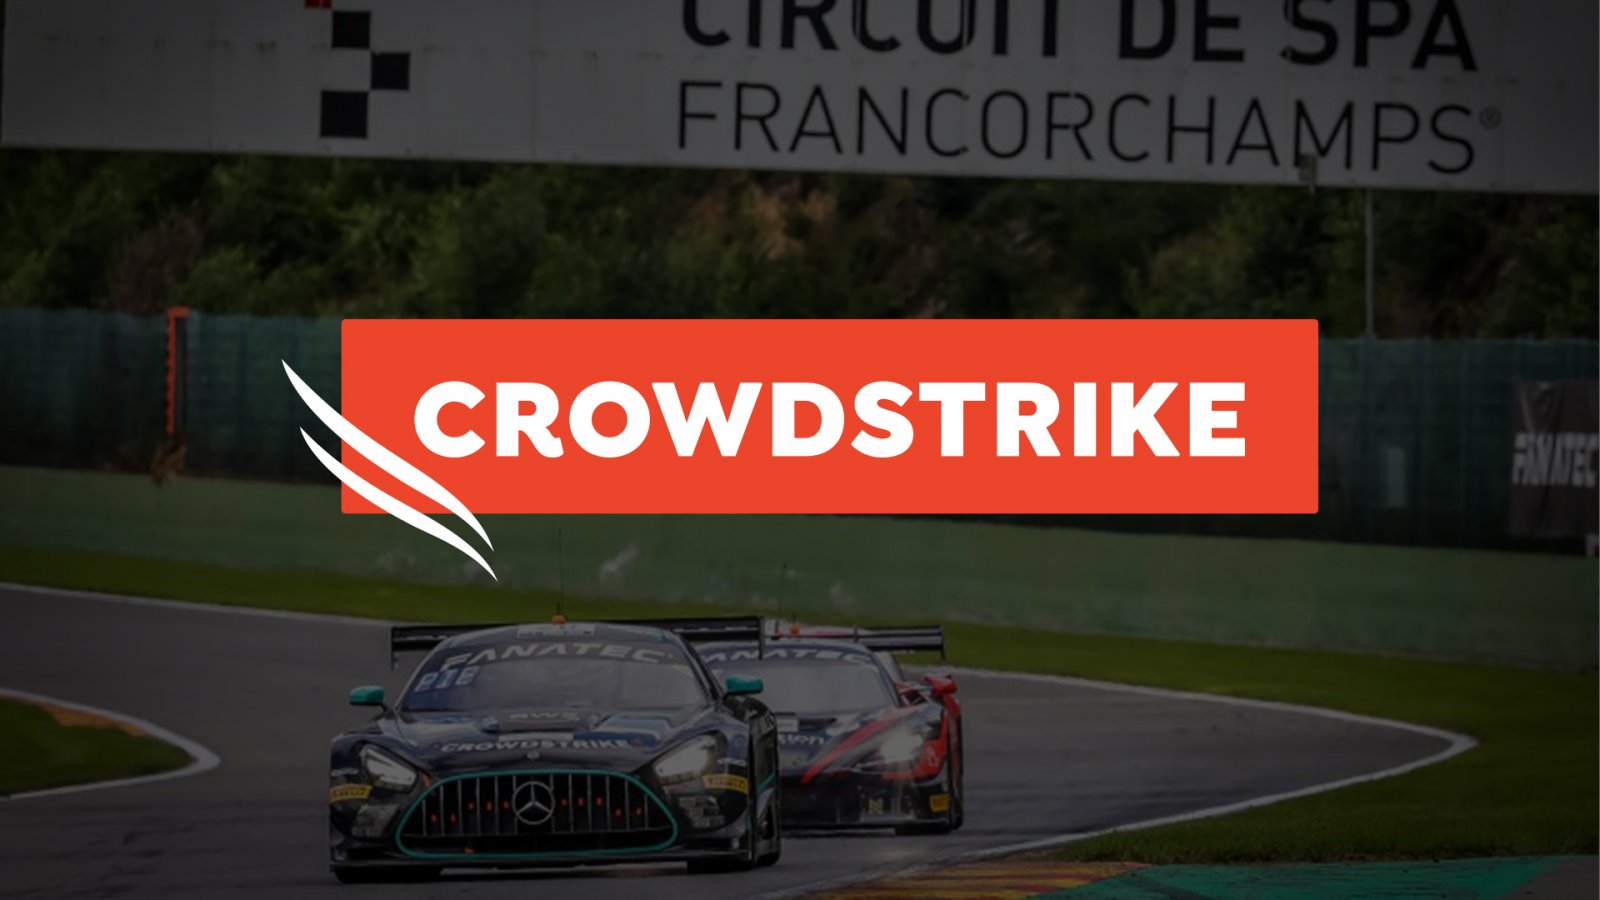 TotalEnergies 24 Hours of Spa Selects CrowdStrike to Protect Race from Cybersecurity Threats